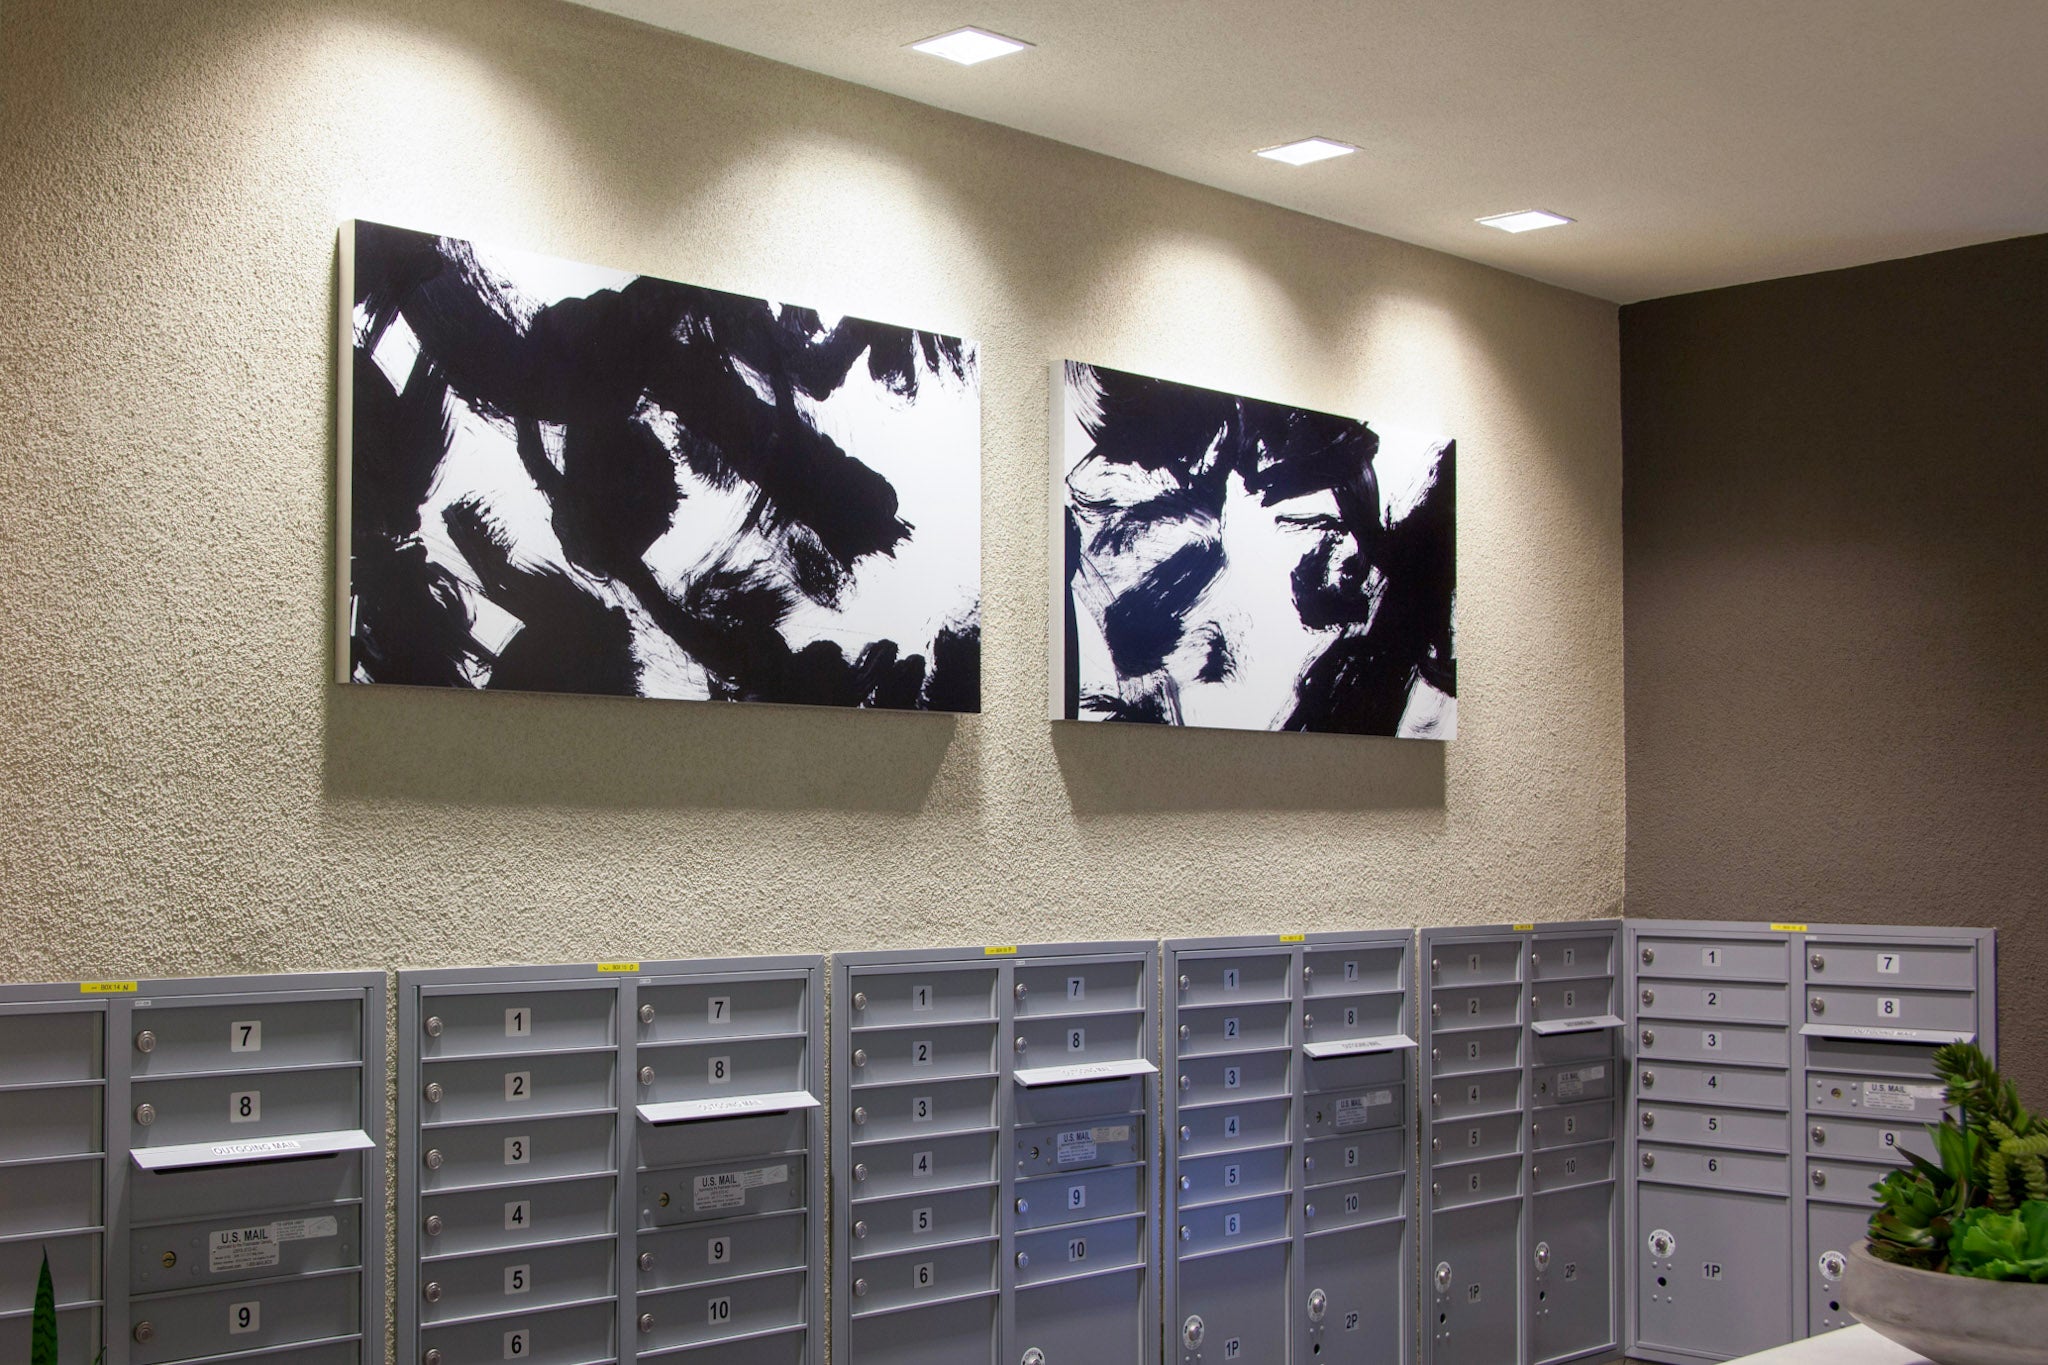 Multifamily apartment mailroom at Alexan Aspect with black and white dynamic canvases above mailboxes, crafted by WRAPPED Studios.